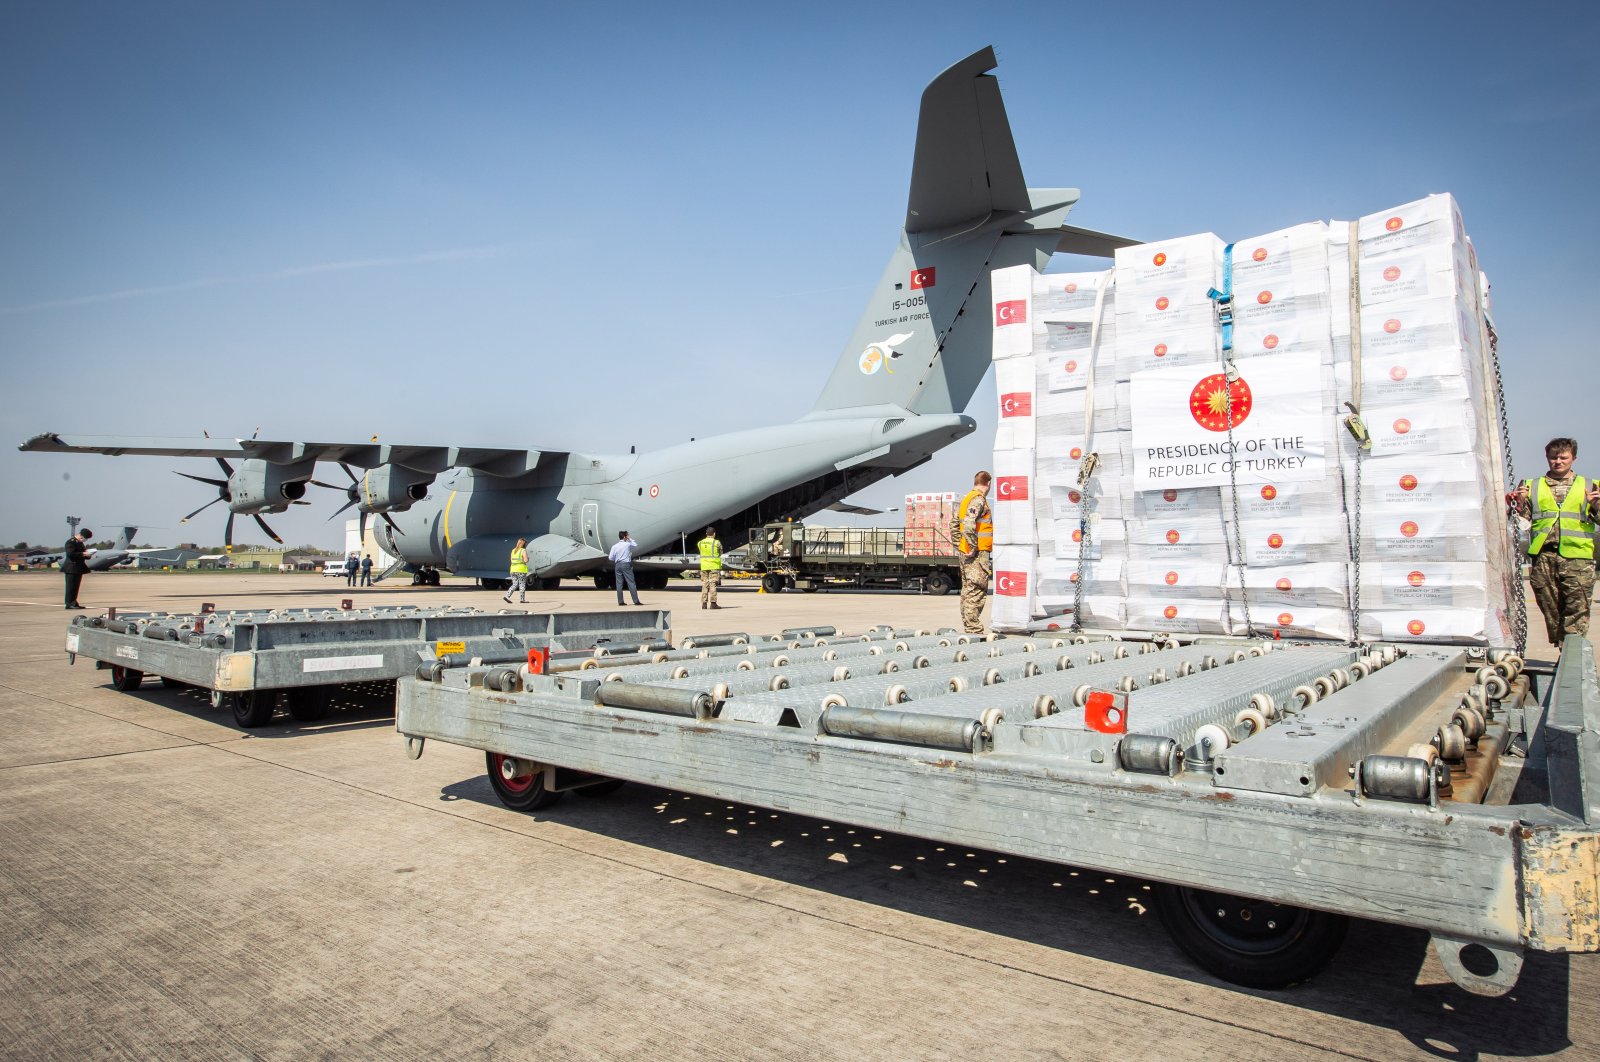 Almost two-thirds of the world have requested medical supplies from Turkey in their fight against COVID-19 and nearly half of these requests have been met. (REUTERS)